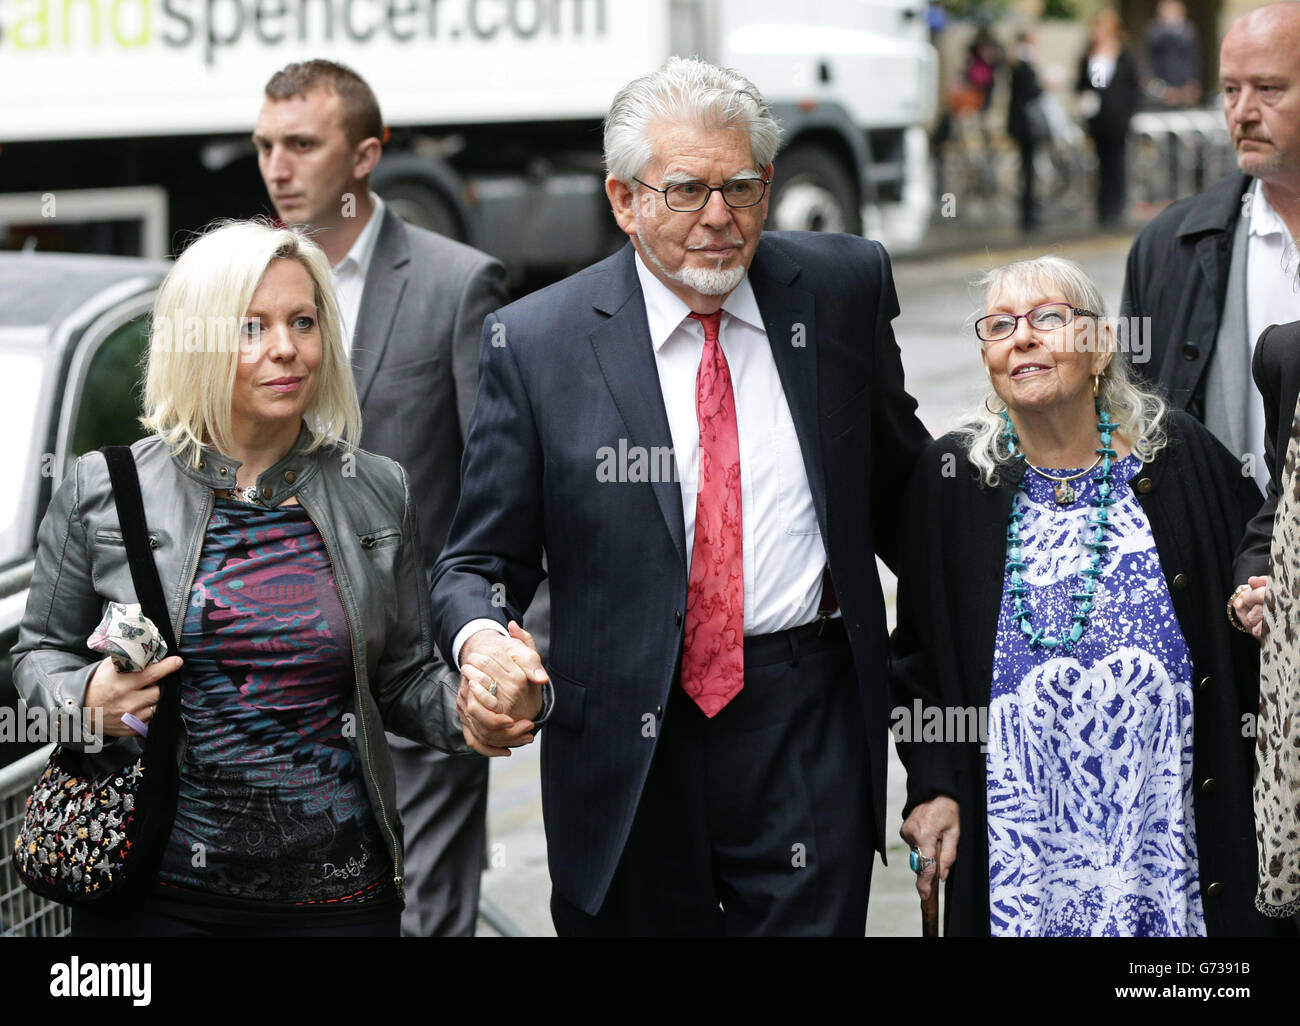 Veteran entertainer Rolf Harris arriving with daughter Bindi (left), wife Alwen at Southwark Crown Court, London, where he he denies 12 counts of indecent assault between 1968 and 1986. Stock Photo